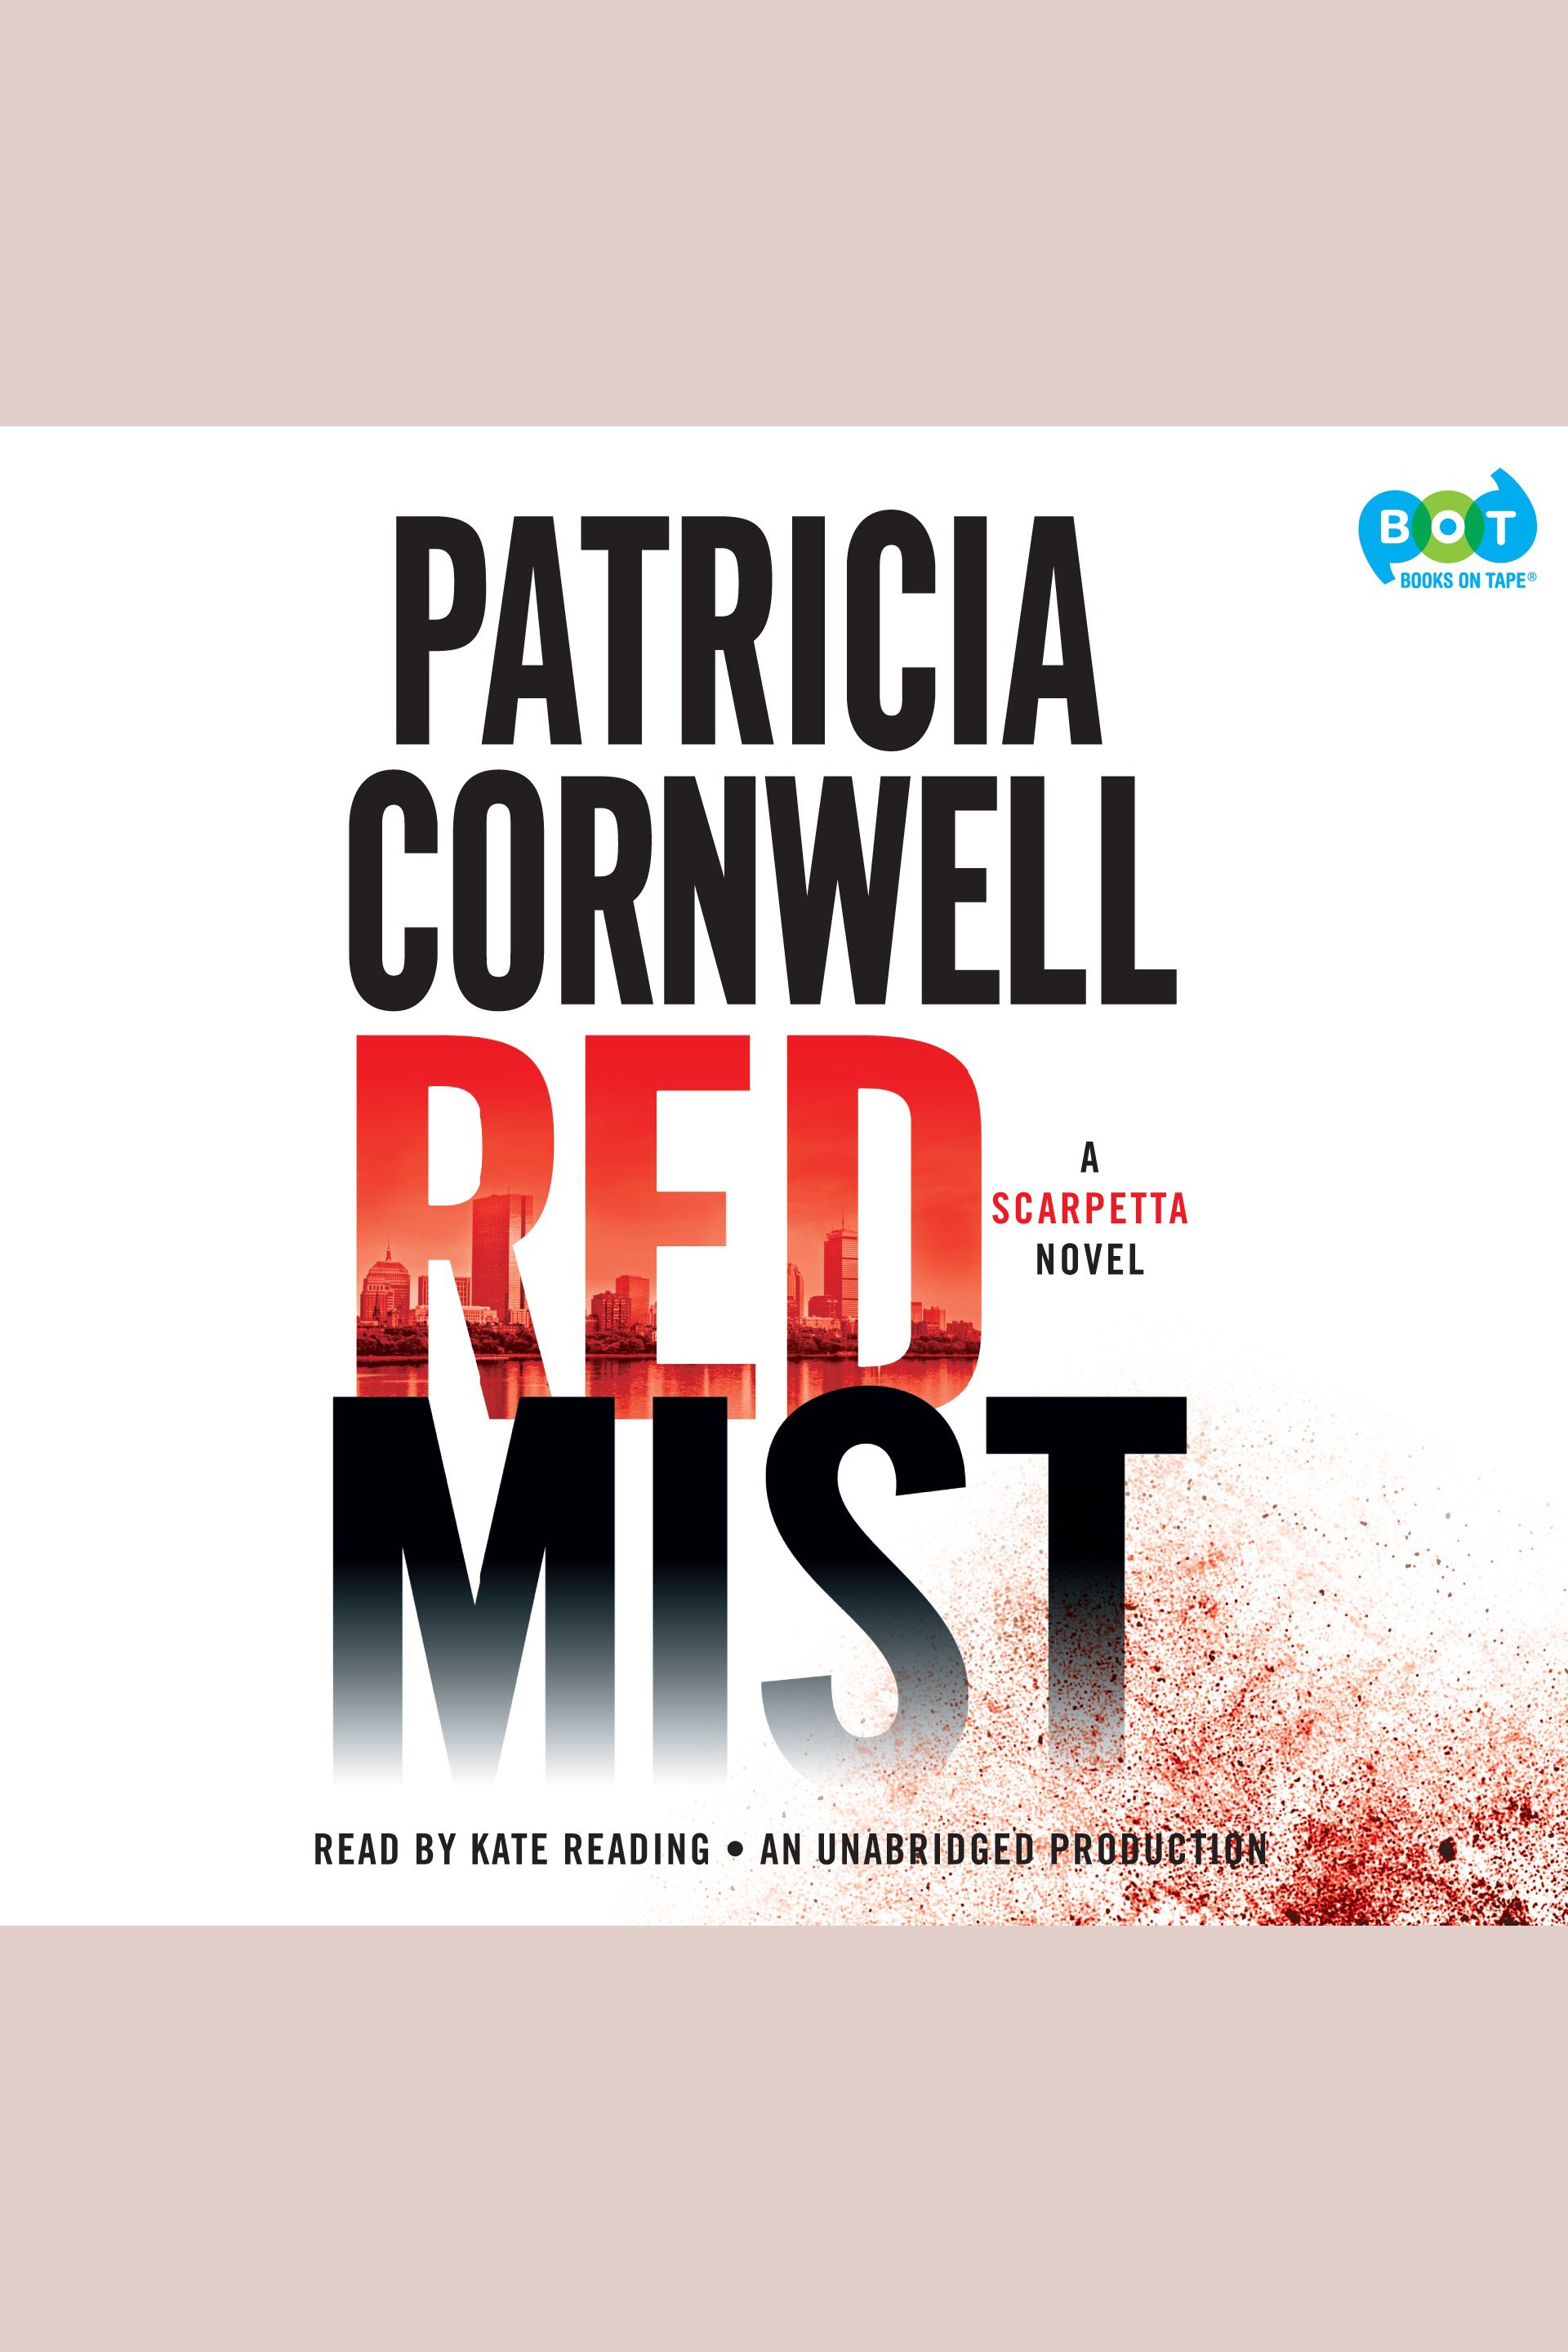 Red mist cover image